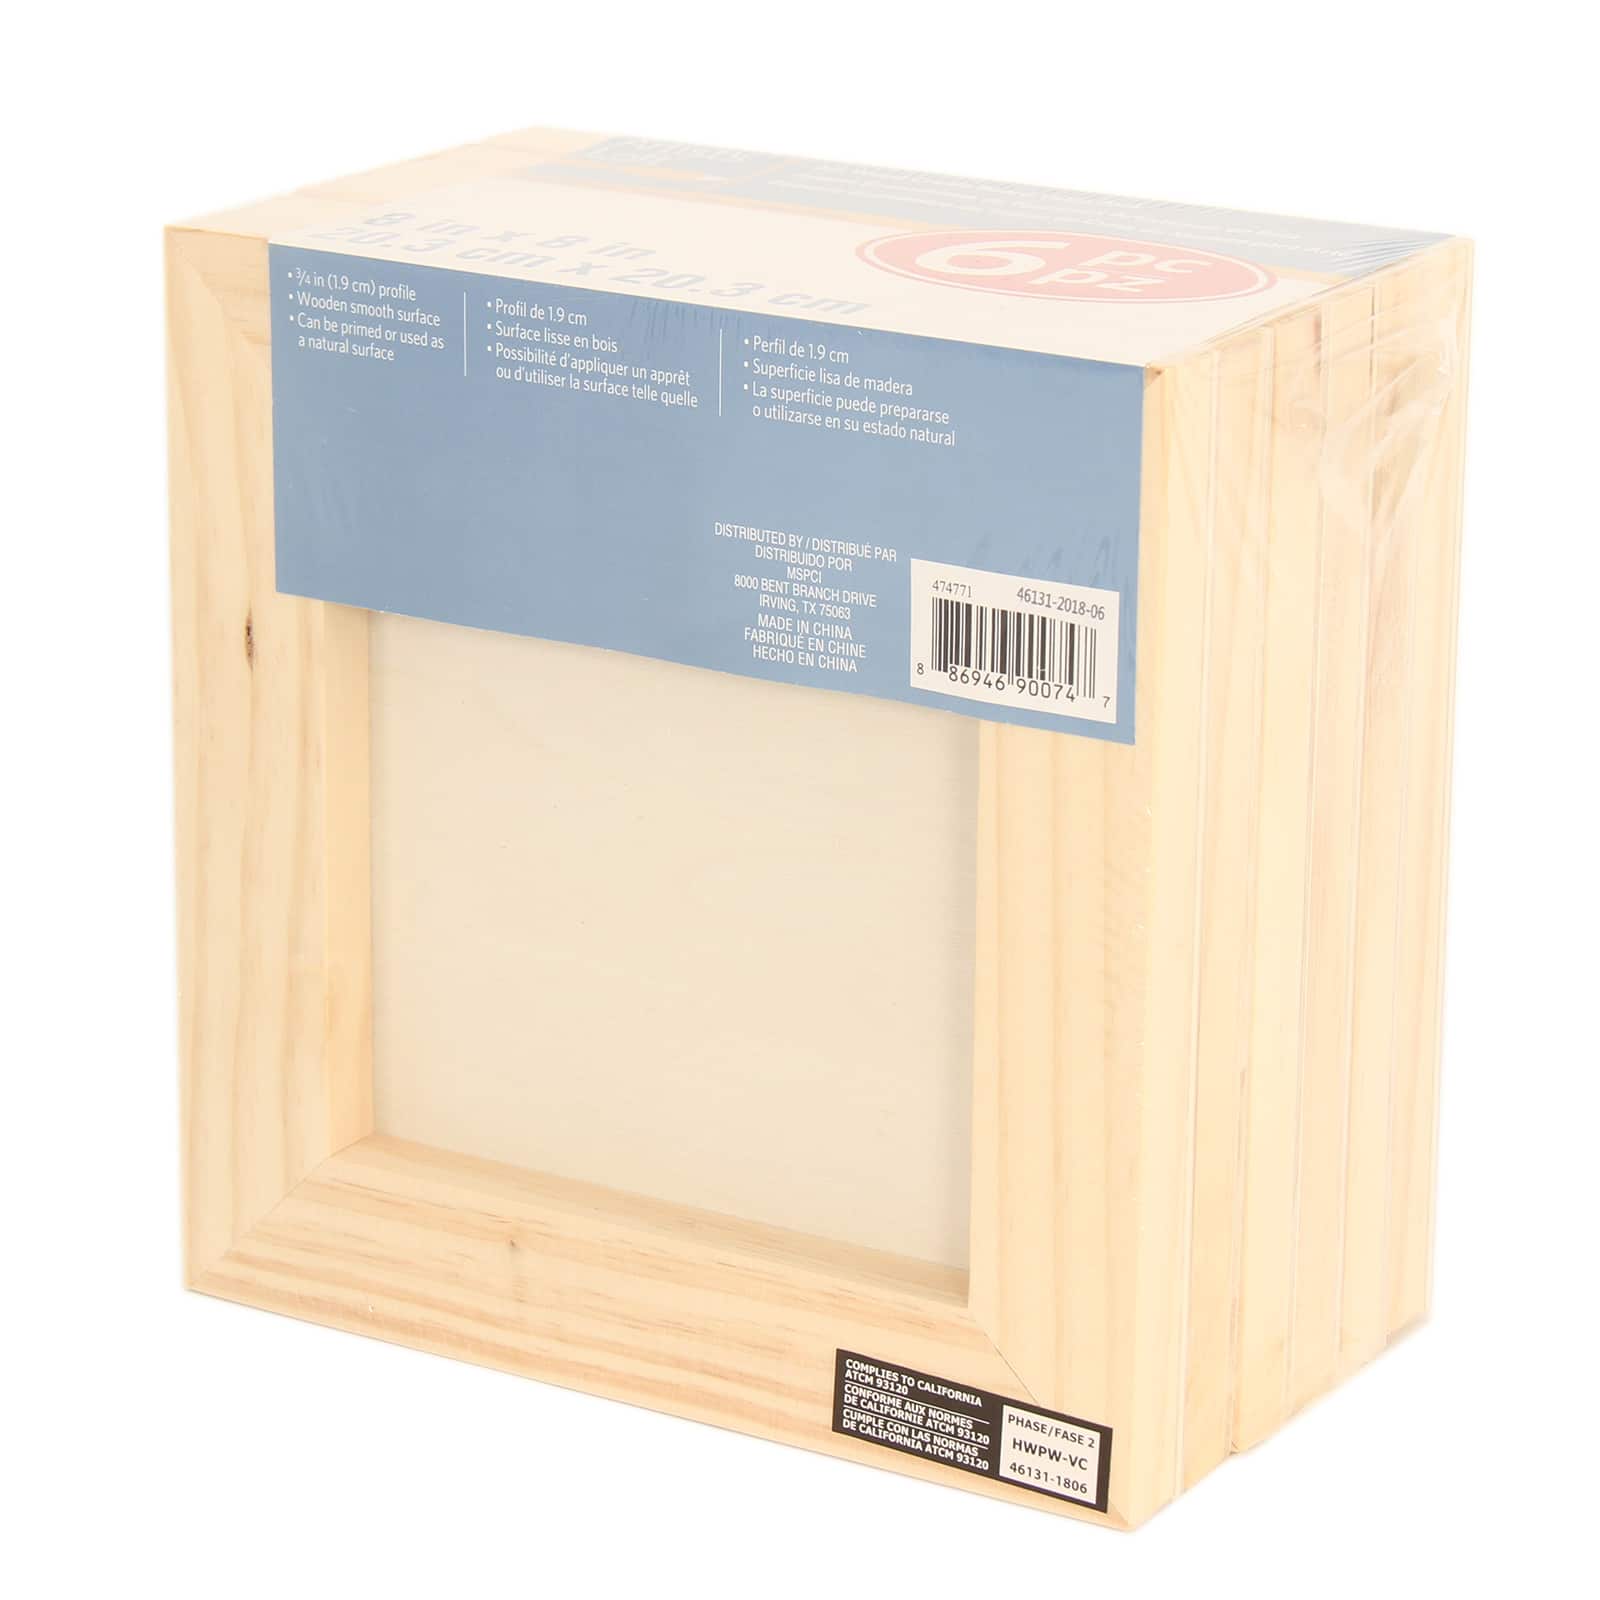 LotFancy Cradled Wood Panels 8 x8 6 Pack Wood Canvas Boards for